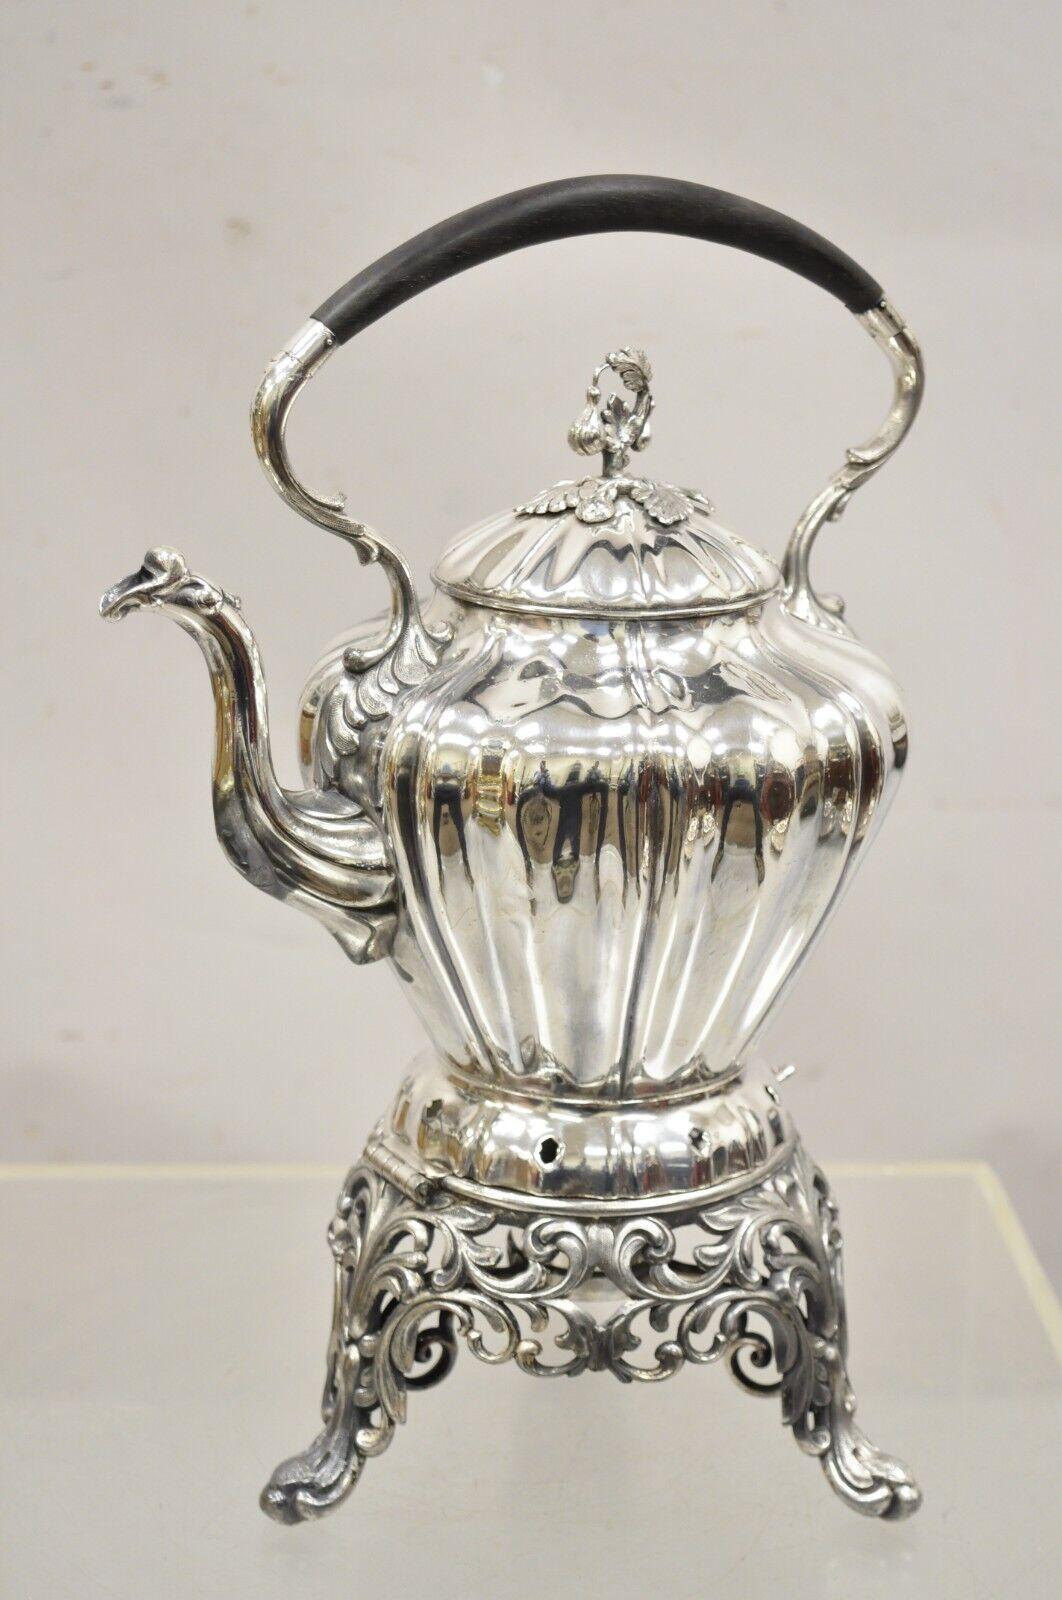 Antique Reed & Barton Silver Plated Victorian Tilting Tea Coffee Pot on Stand. Item features has a pierced decorated base, wooden handle, maple leaf and vine lid, original hallmark, nice tilting form with original chain. Circa 1900. Measurements: